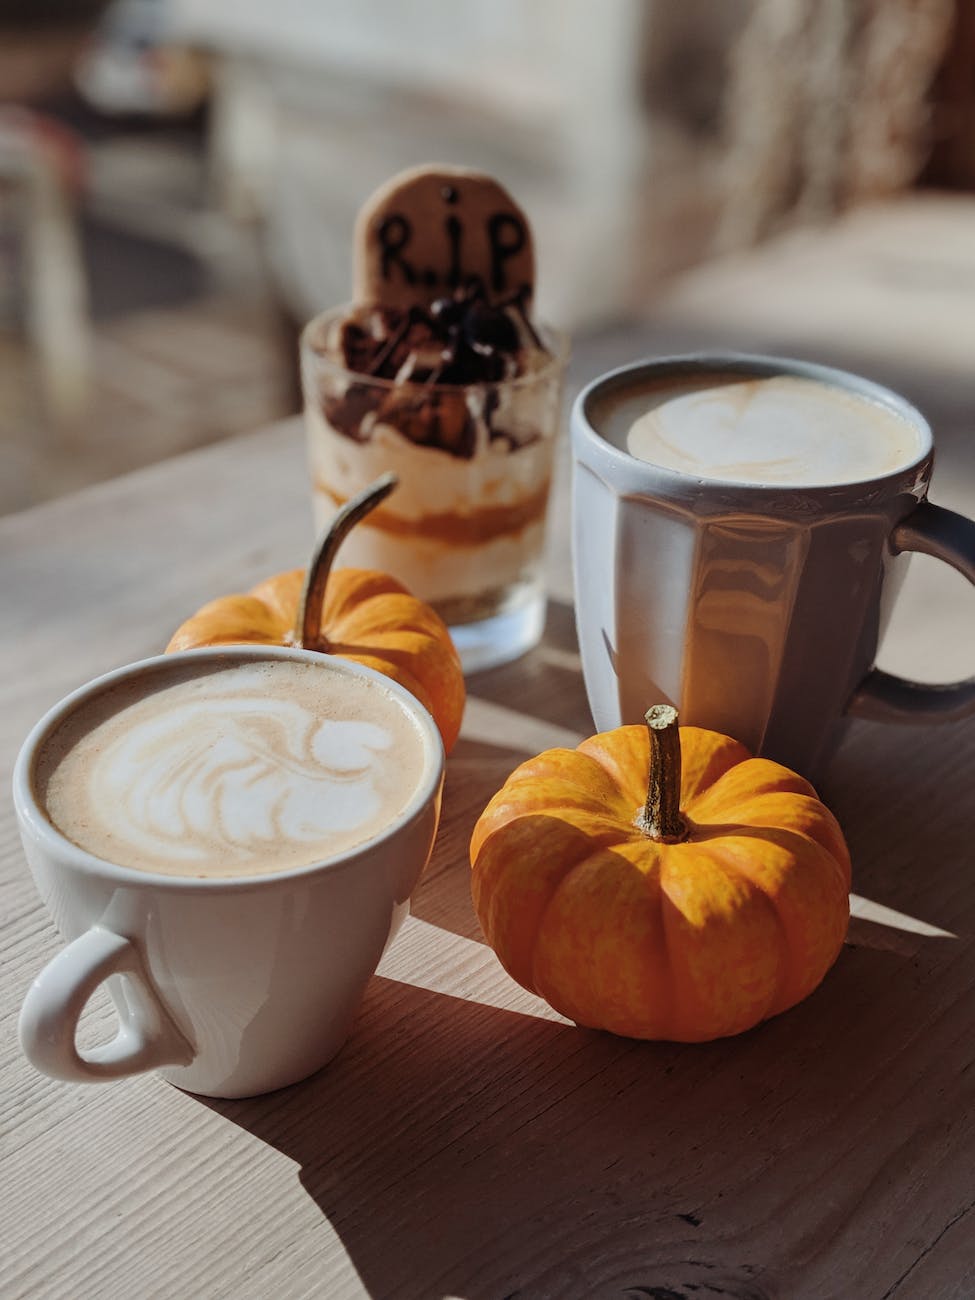 Pumpkin Spice Everything: Why This Fall Flavor Is So Popular